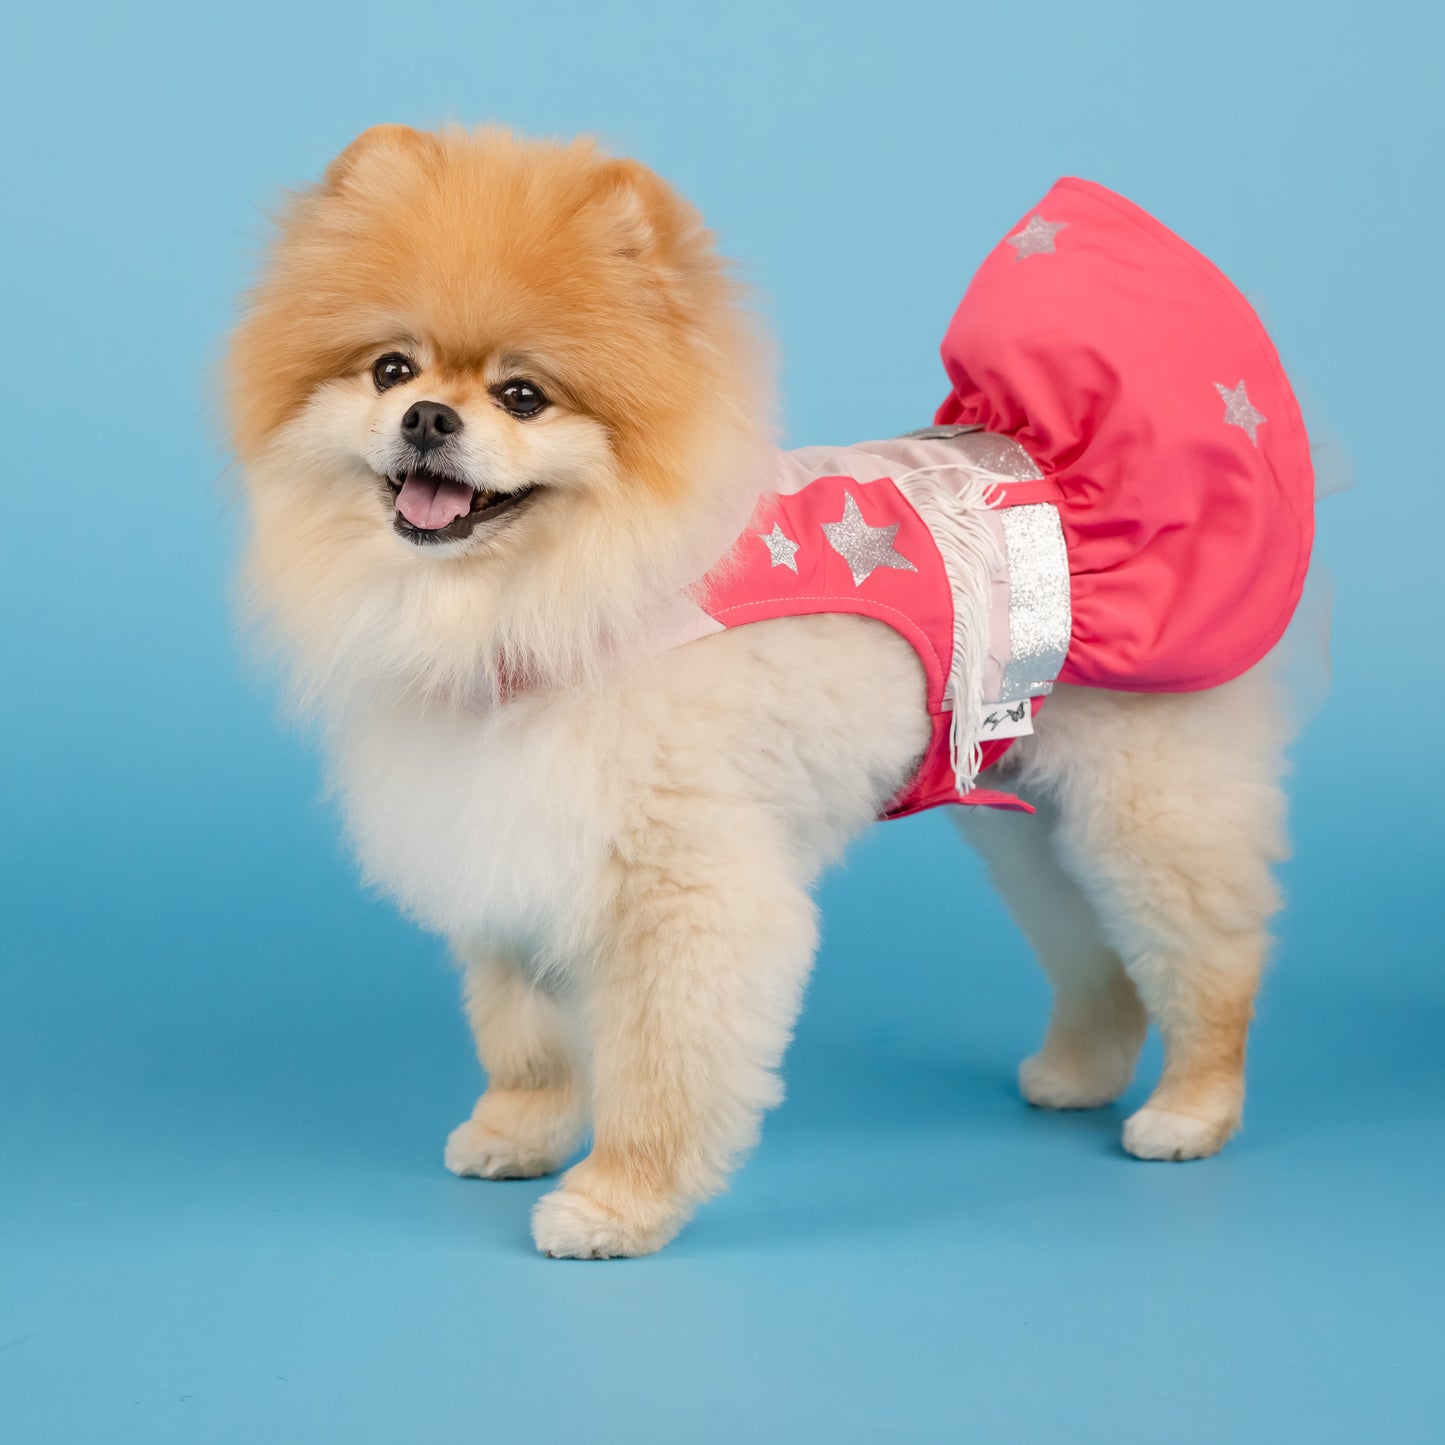 Glittery Stars Cowgirl Dress for Pets - Pink